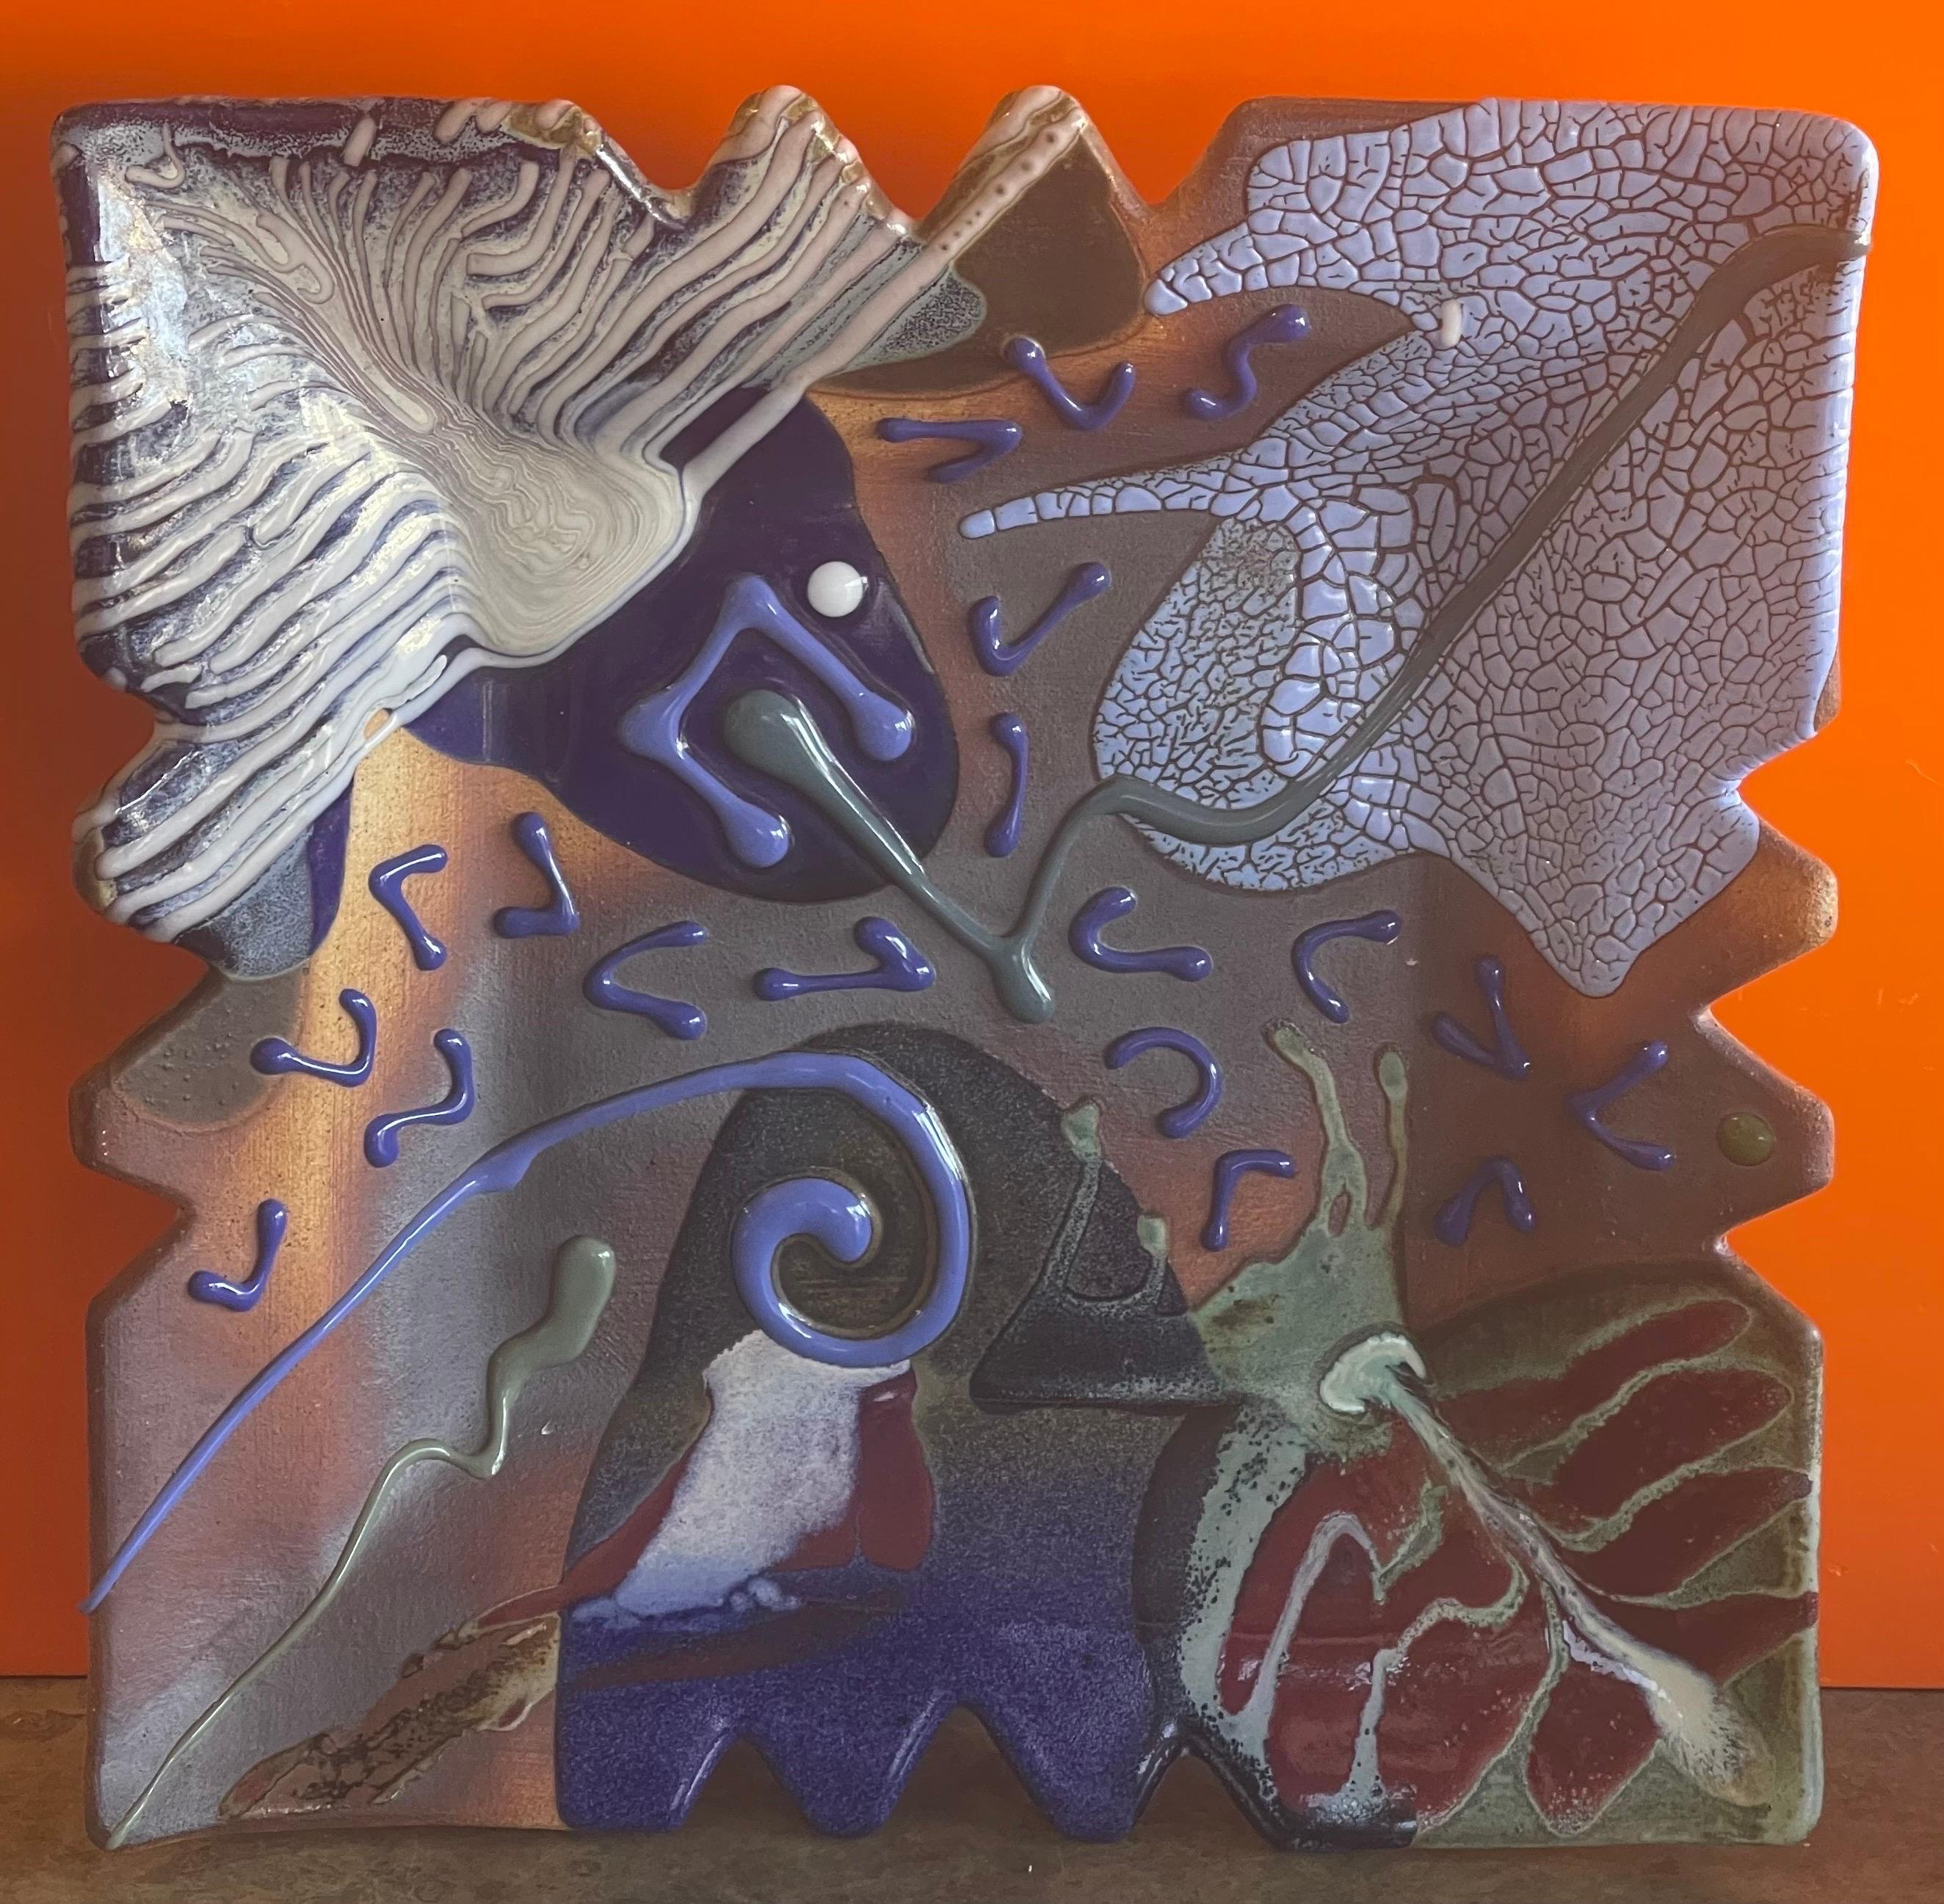 A finely decorated postmodern studio pottery ceramic wall sculpture by Seattle potter Matthew Patton, circa 1990s. Potter is known for his dramatic glaze effects and texture used on this ceramic creations. The piece has a complex surface decoration